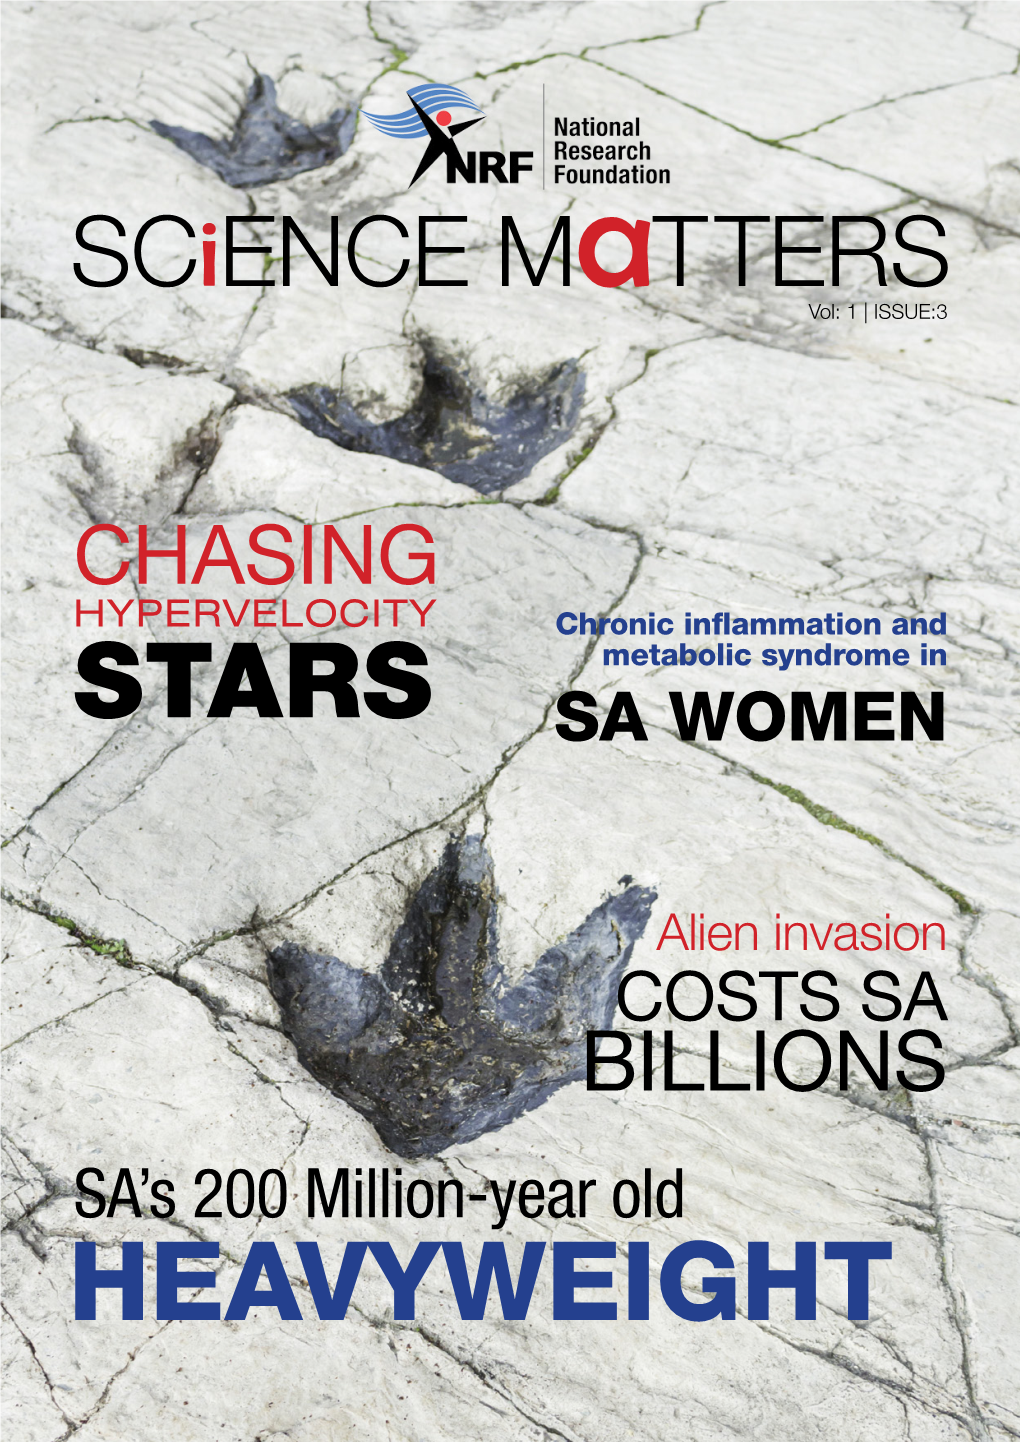 NRF Science Matters Newsletter Issue 3.Pdf